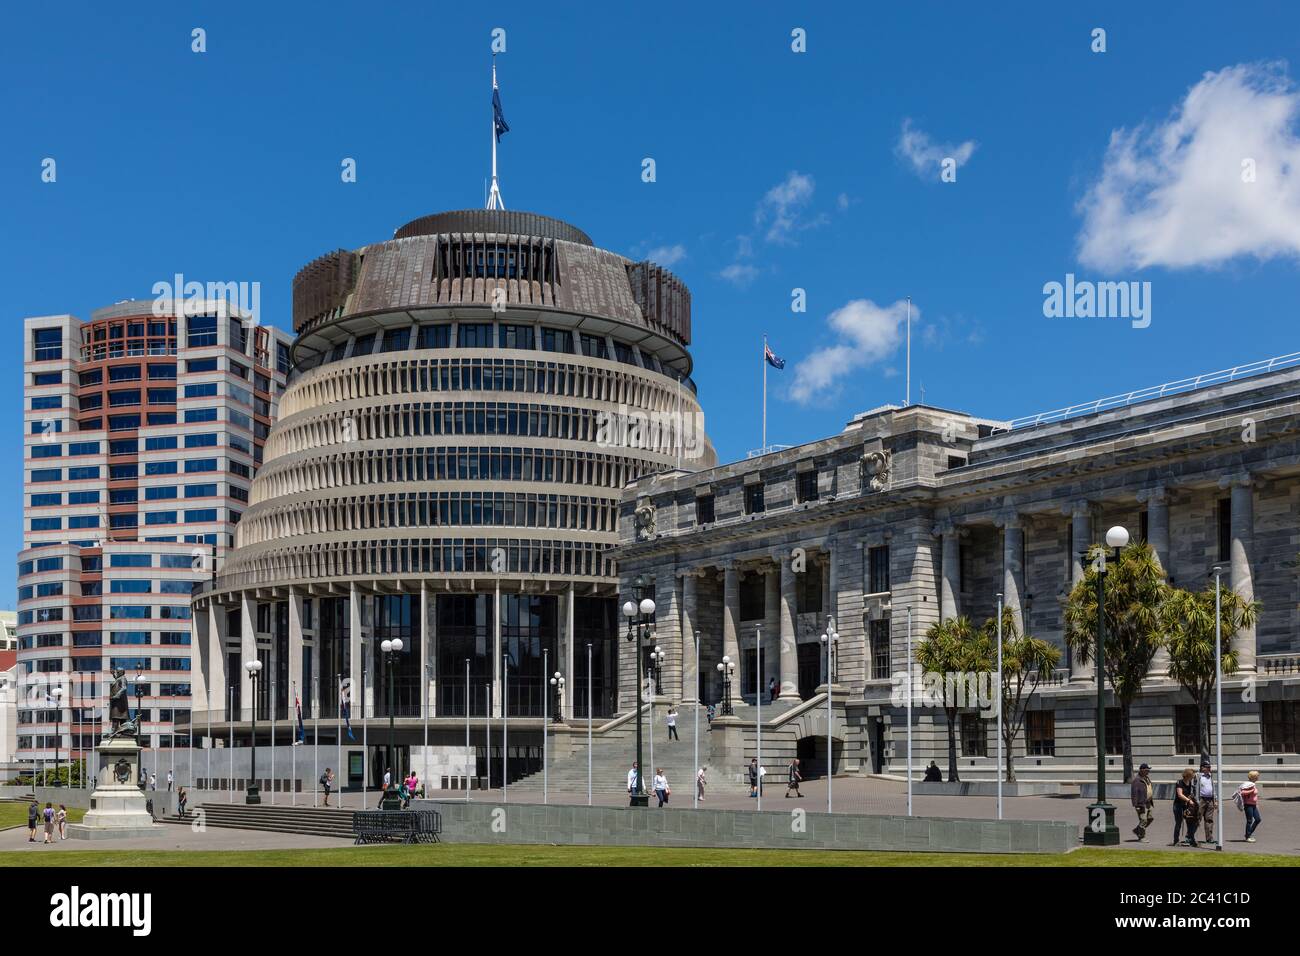 Wellington, New Zealand: The "Beehive" (left) is the common name for the Executive Wing of the New Zealand Parliament Building (right side) Stock Photo